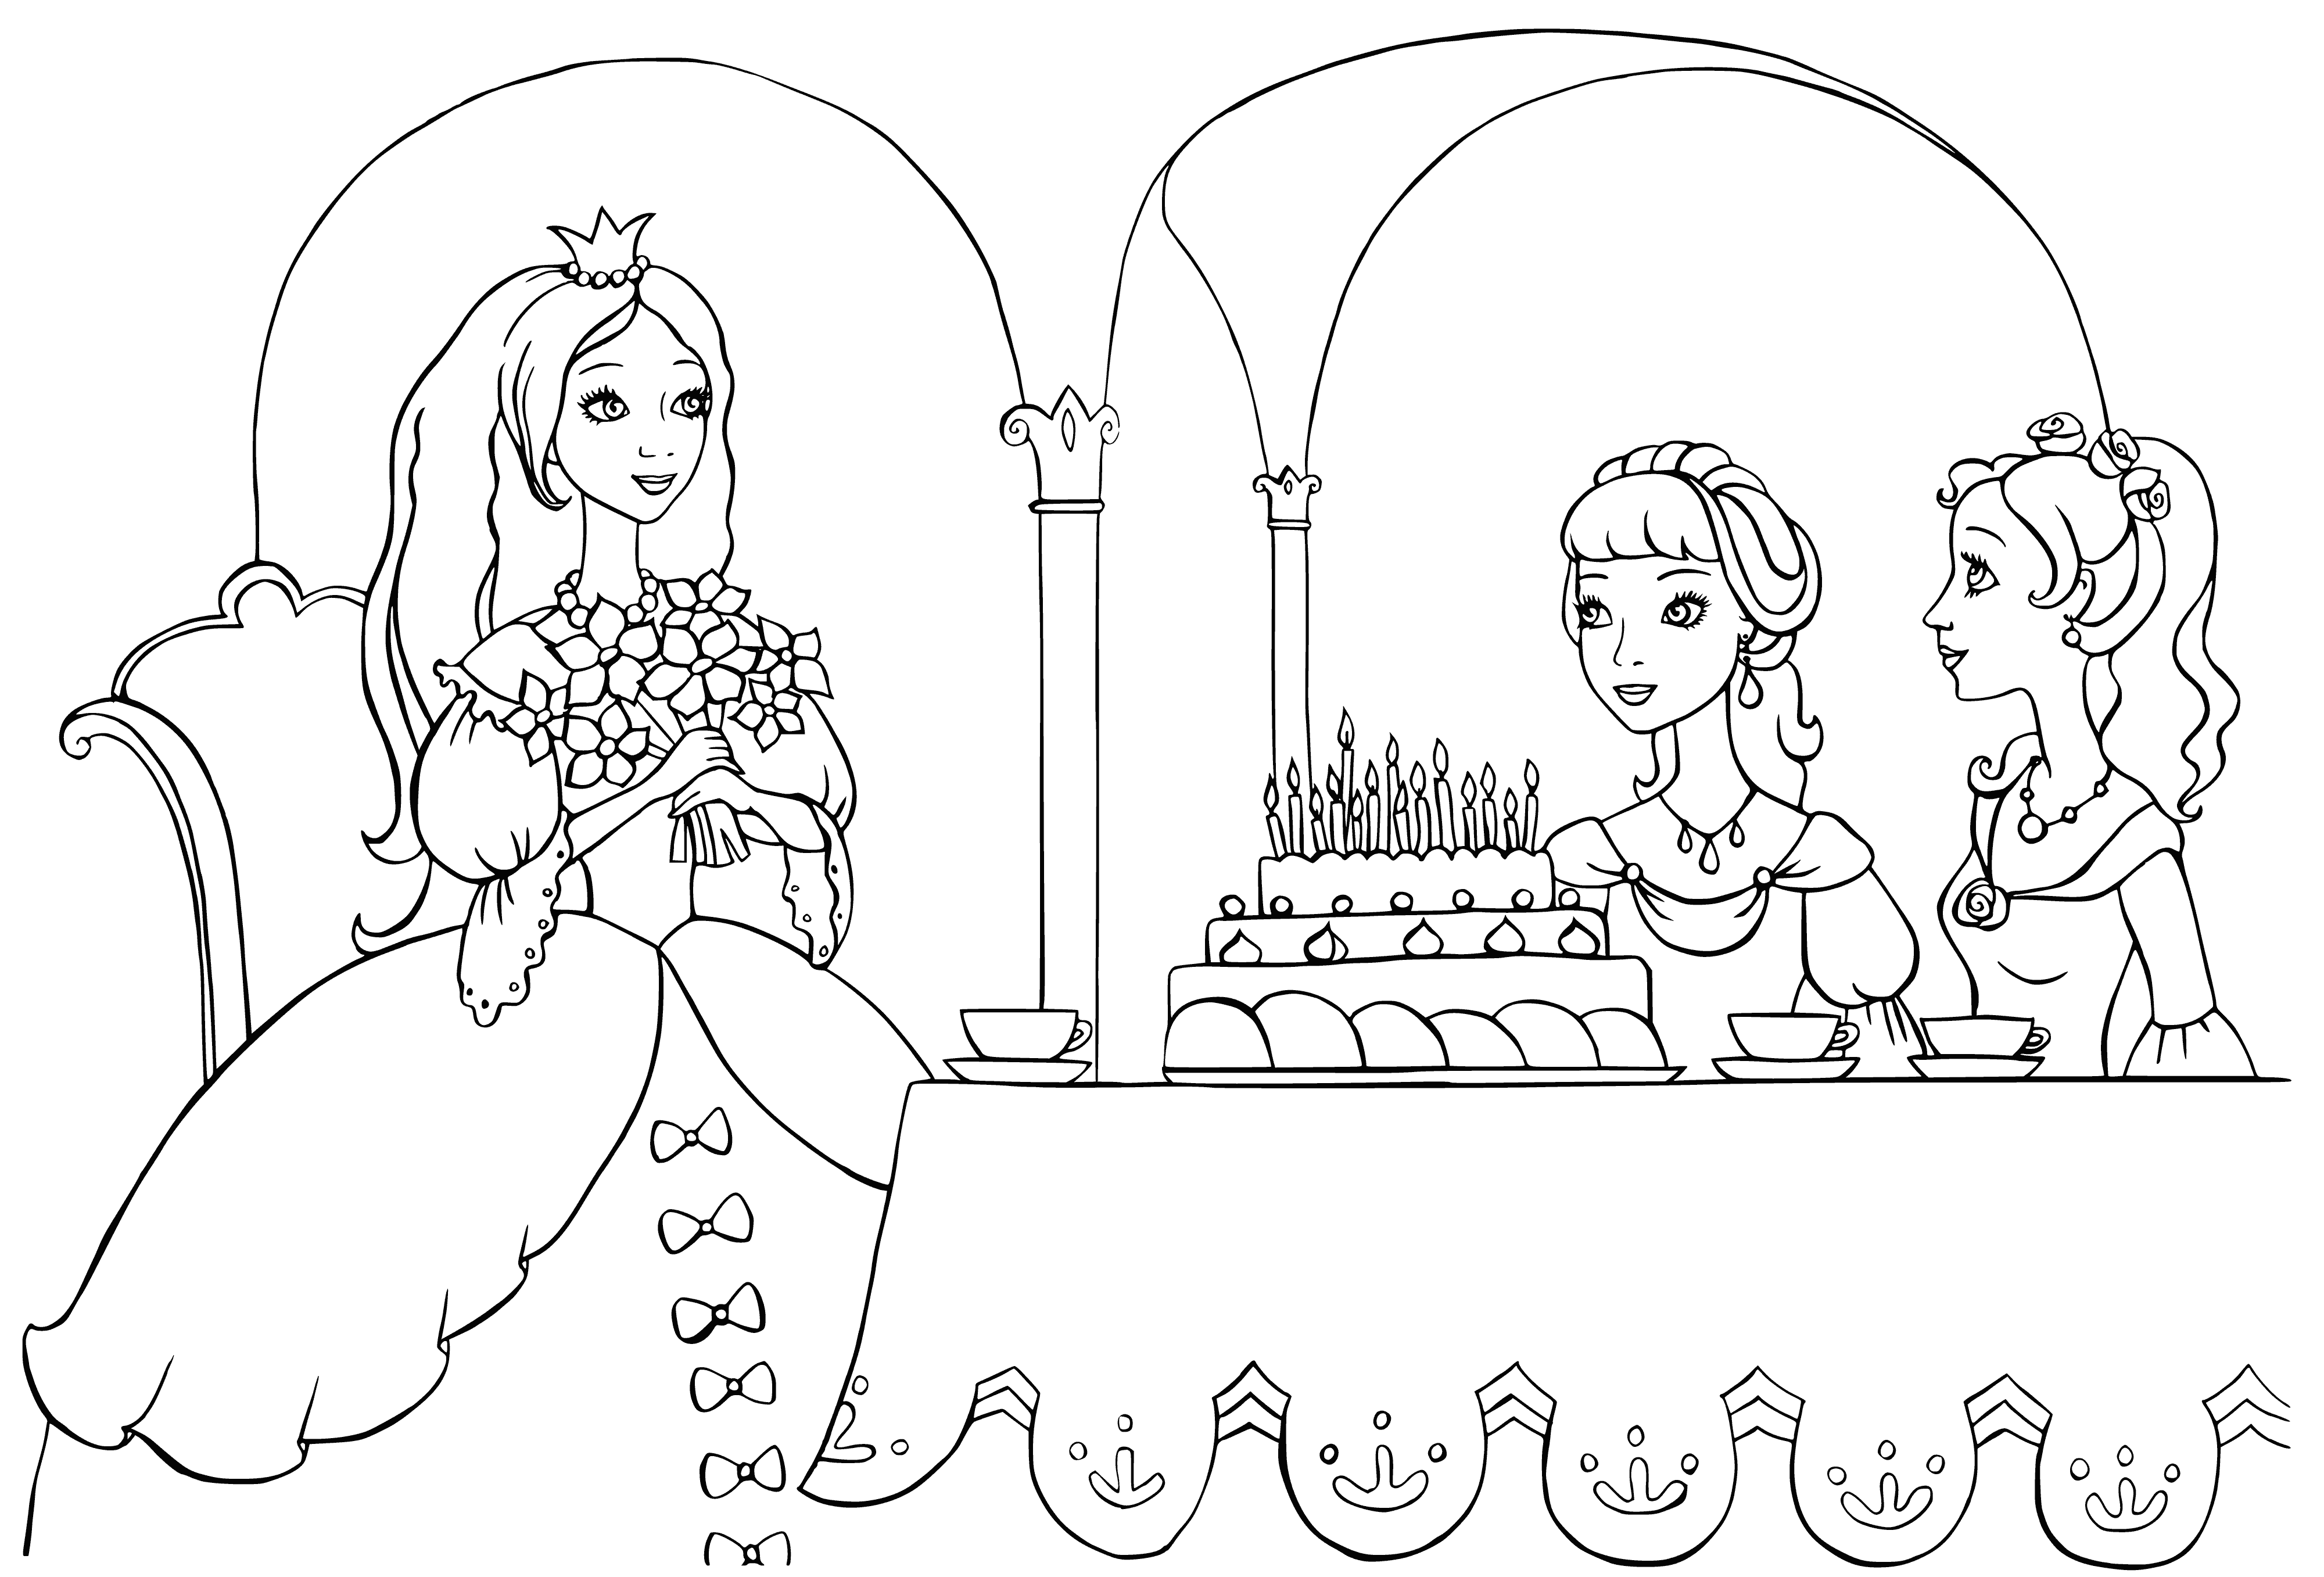 coloring page: Fairies gathered around a table for a birthday celebration with a cake, gifts, and brightly colored dresses. #fairies #birthday #celebration